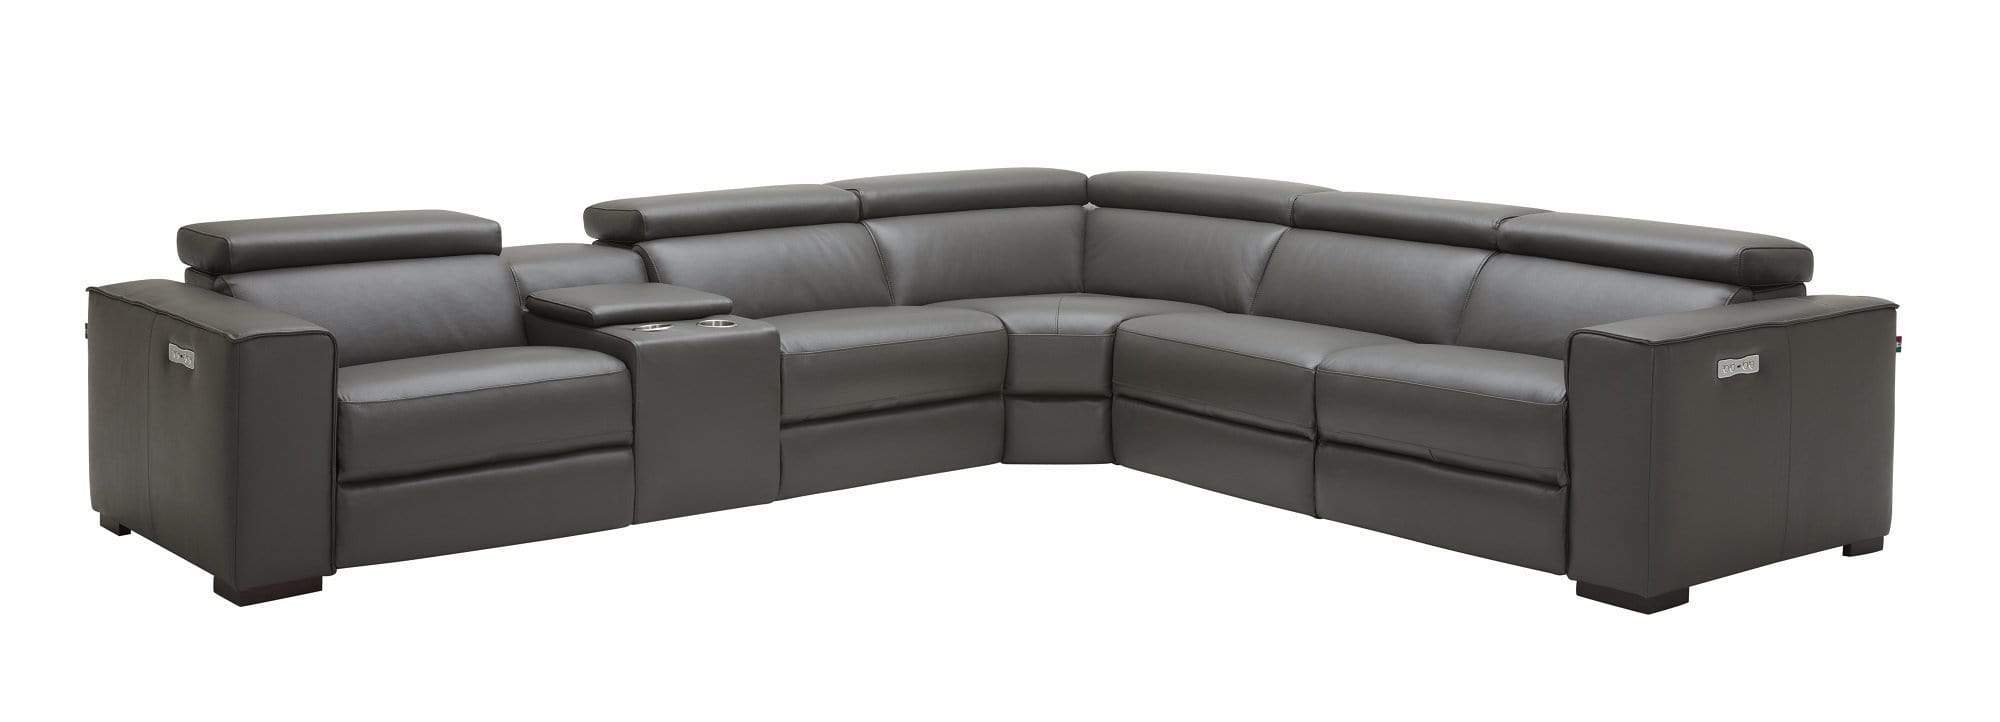 Picasso Motion Sectional in Dark Grey | J&M Furniture